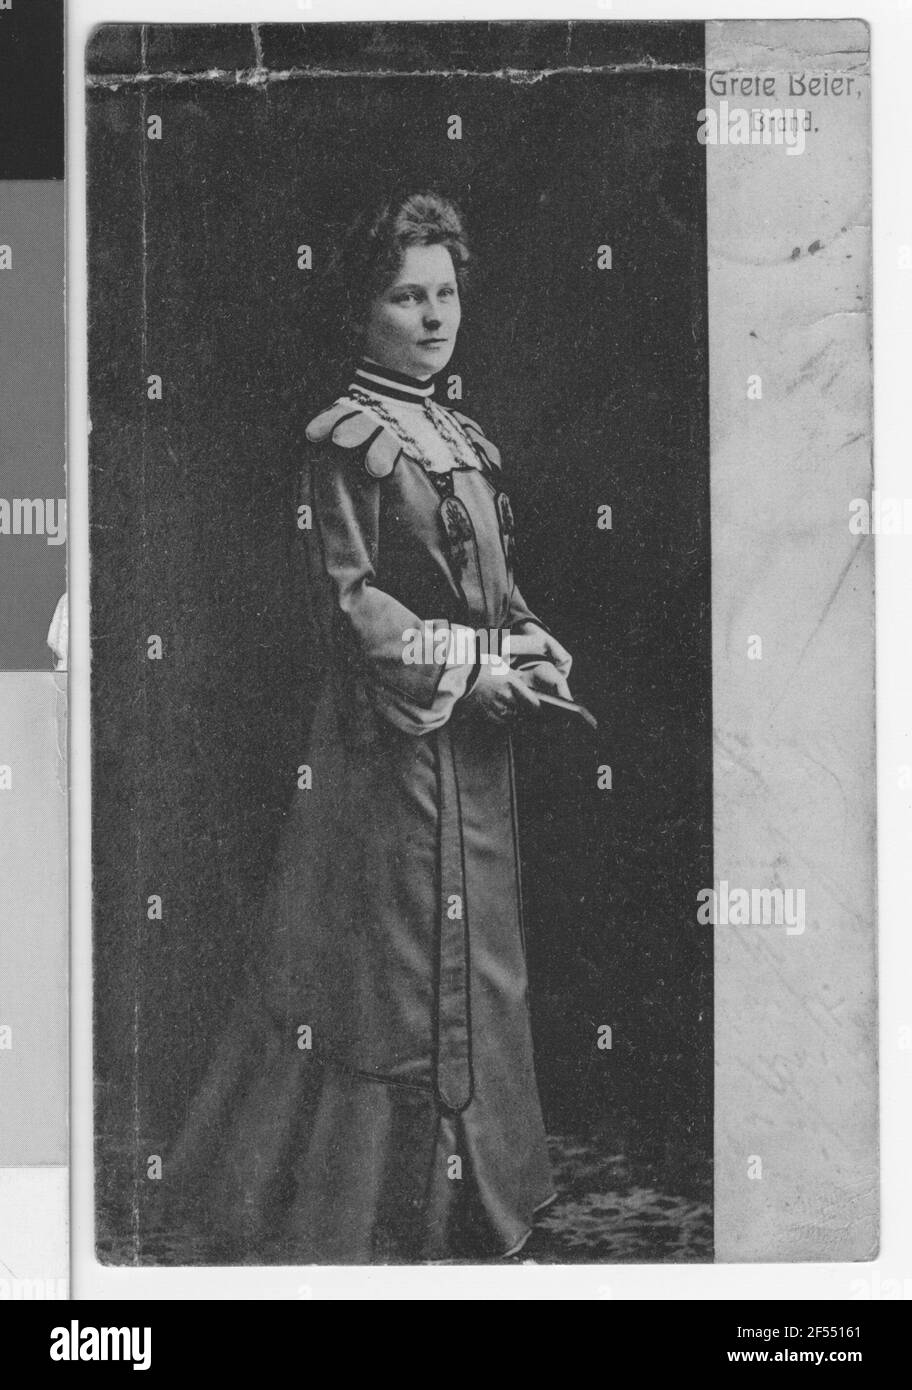 All-portrait Marie Margarethe Beier, called Grete Beier, Mayor's daughter from Brand in Saxony, for murder in Freiberg on 23.07.1908 Guillotinated (last public execution of a woman) Stock Photo